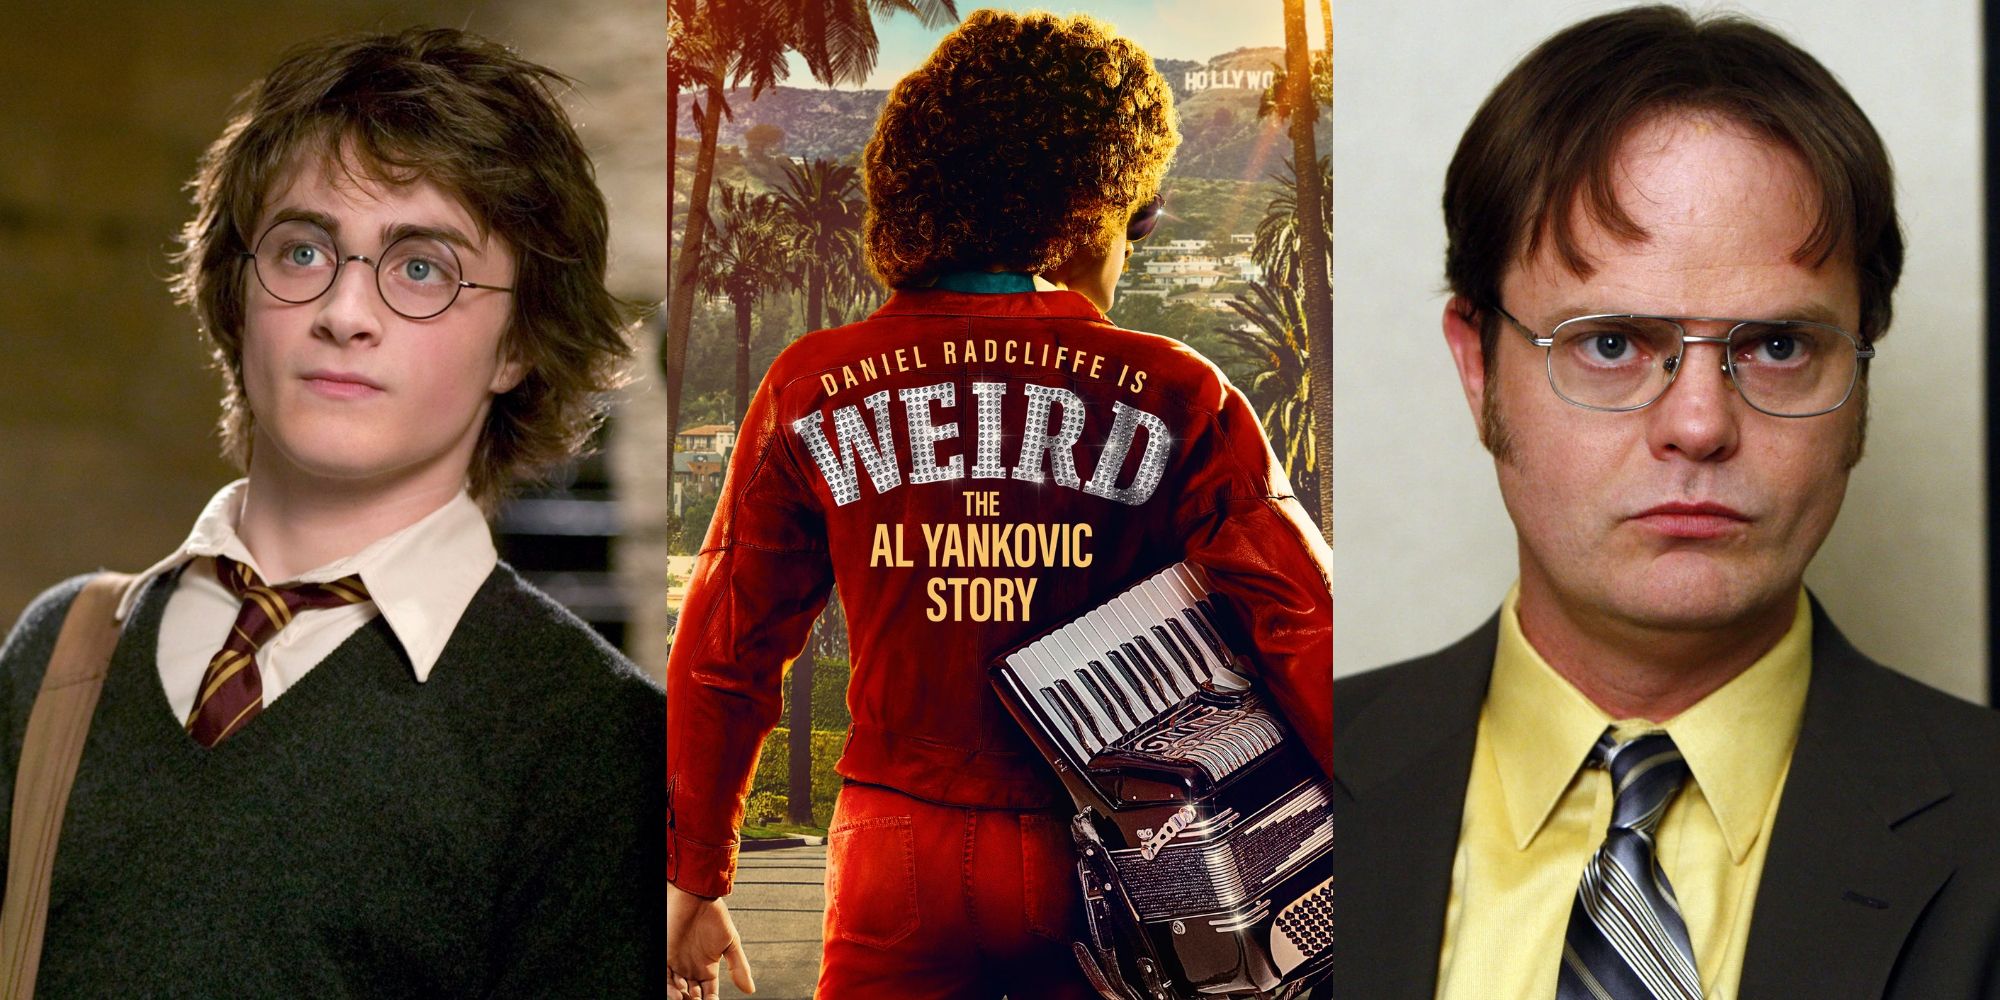 Daniel Radcliffe as Harry Potter, a poster for Weird: The Al Yankovic Story, and Rainn Wilson as Dwight Schrute